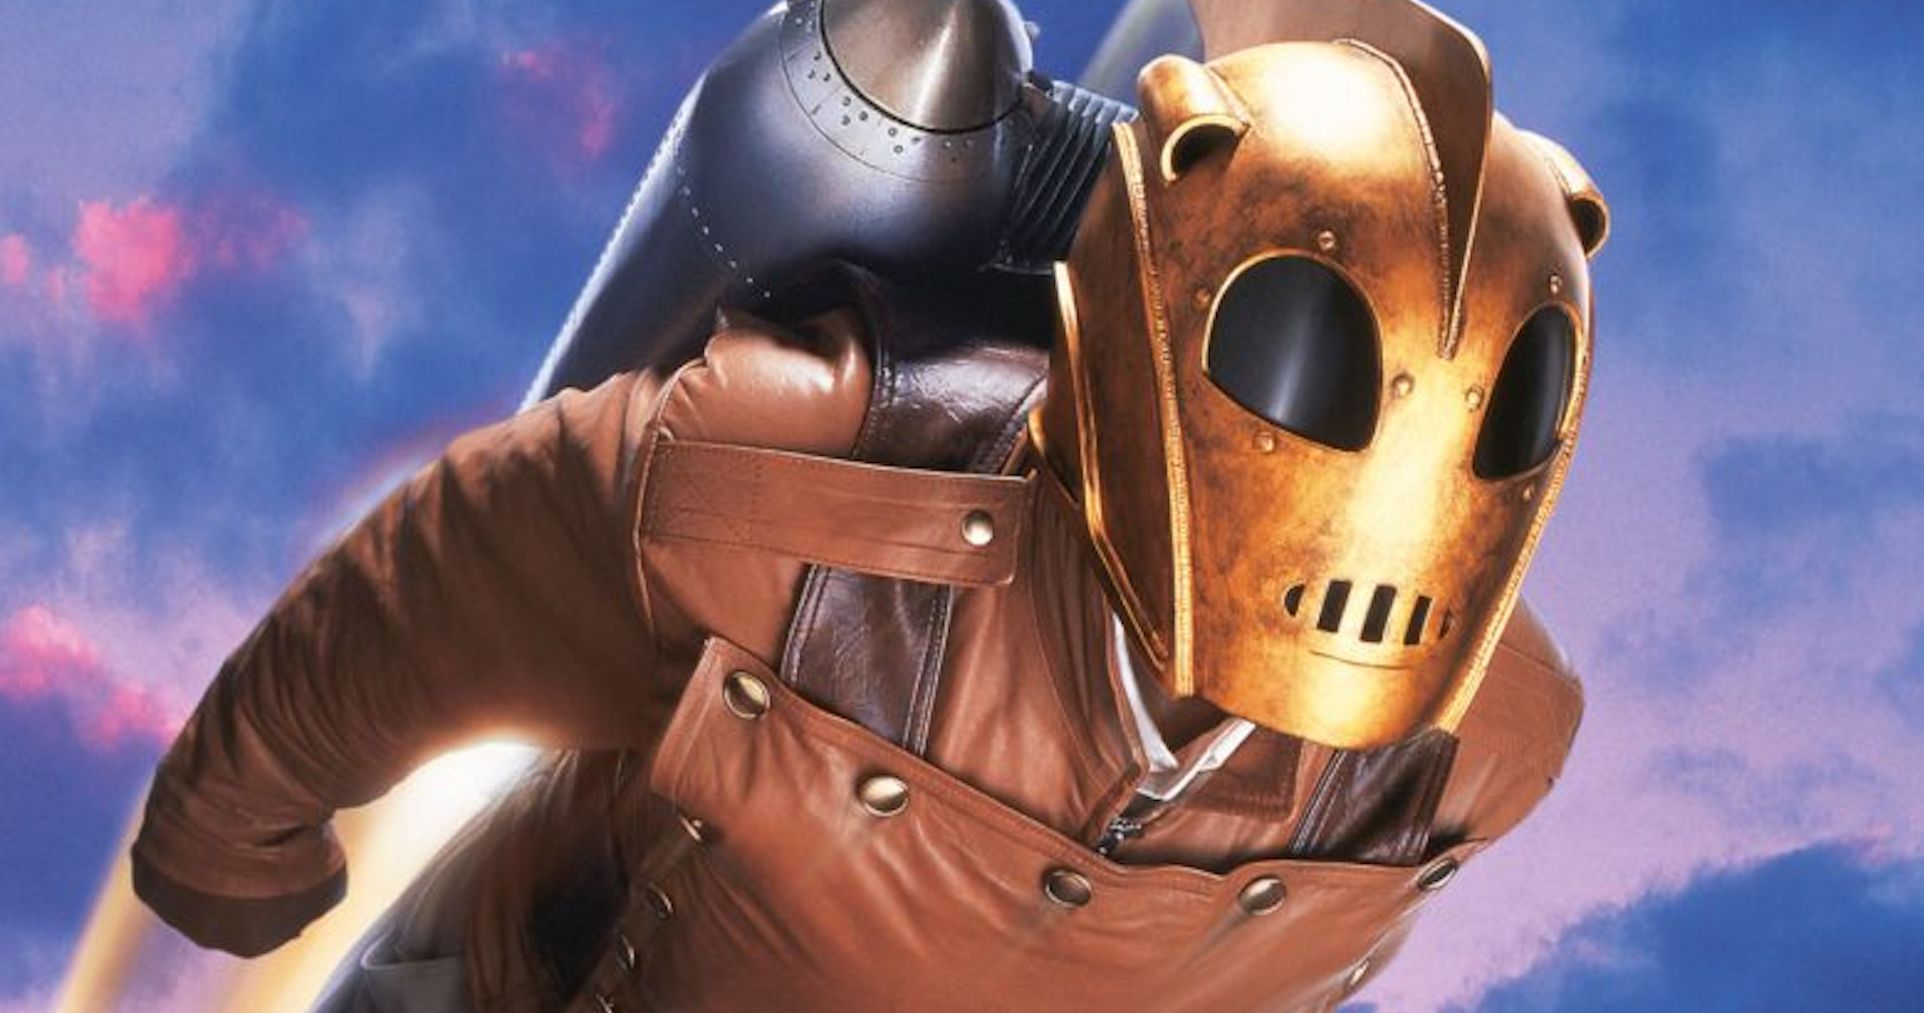 Will The Rocketeer 2 Ever Happen? Original Star Billy Campbell Has Mixed Feelings